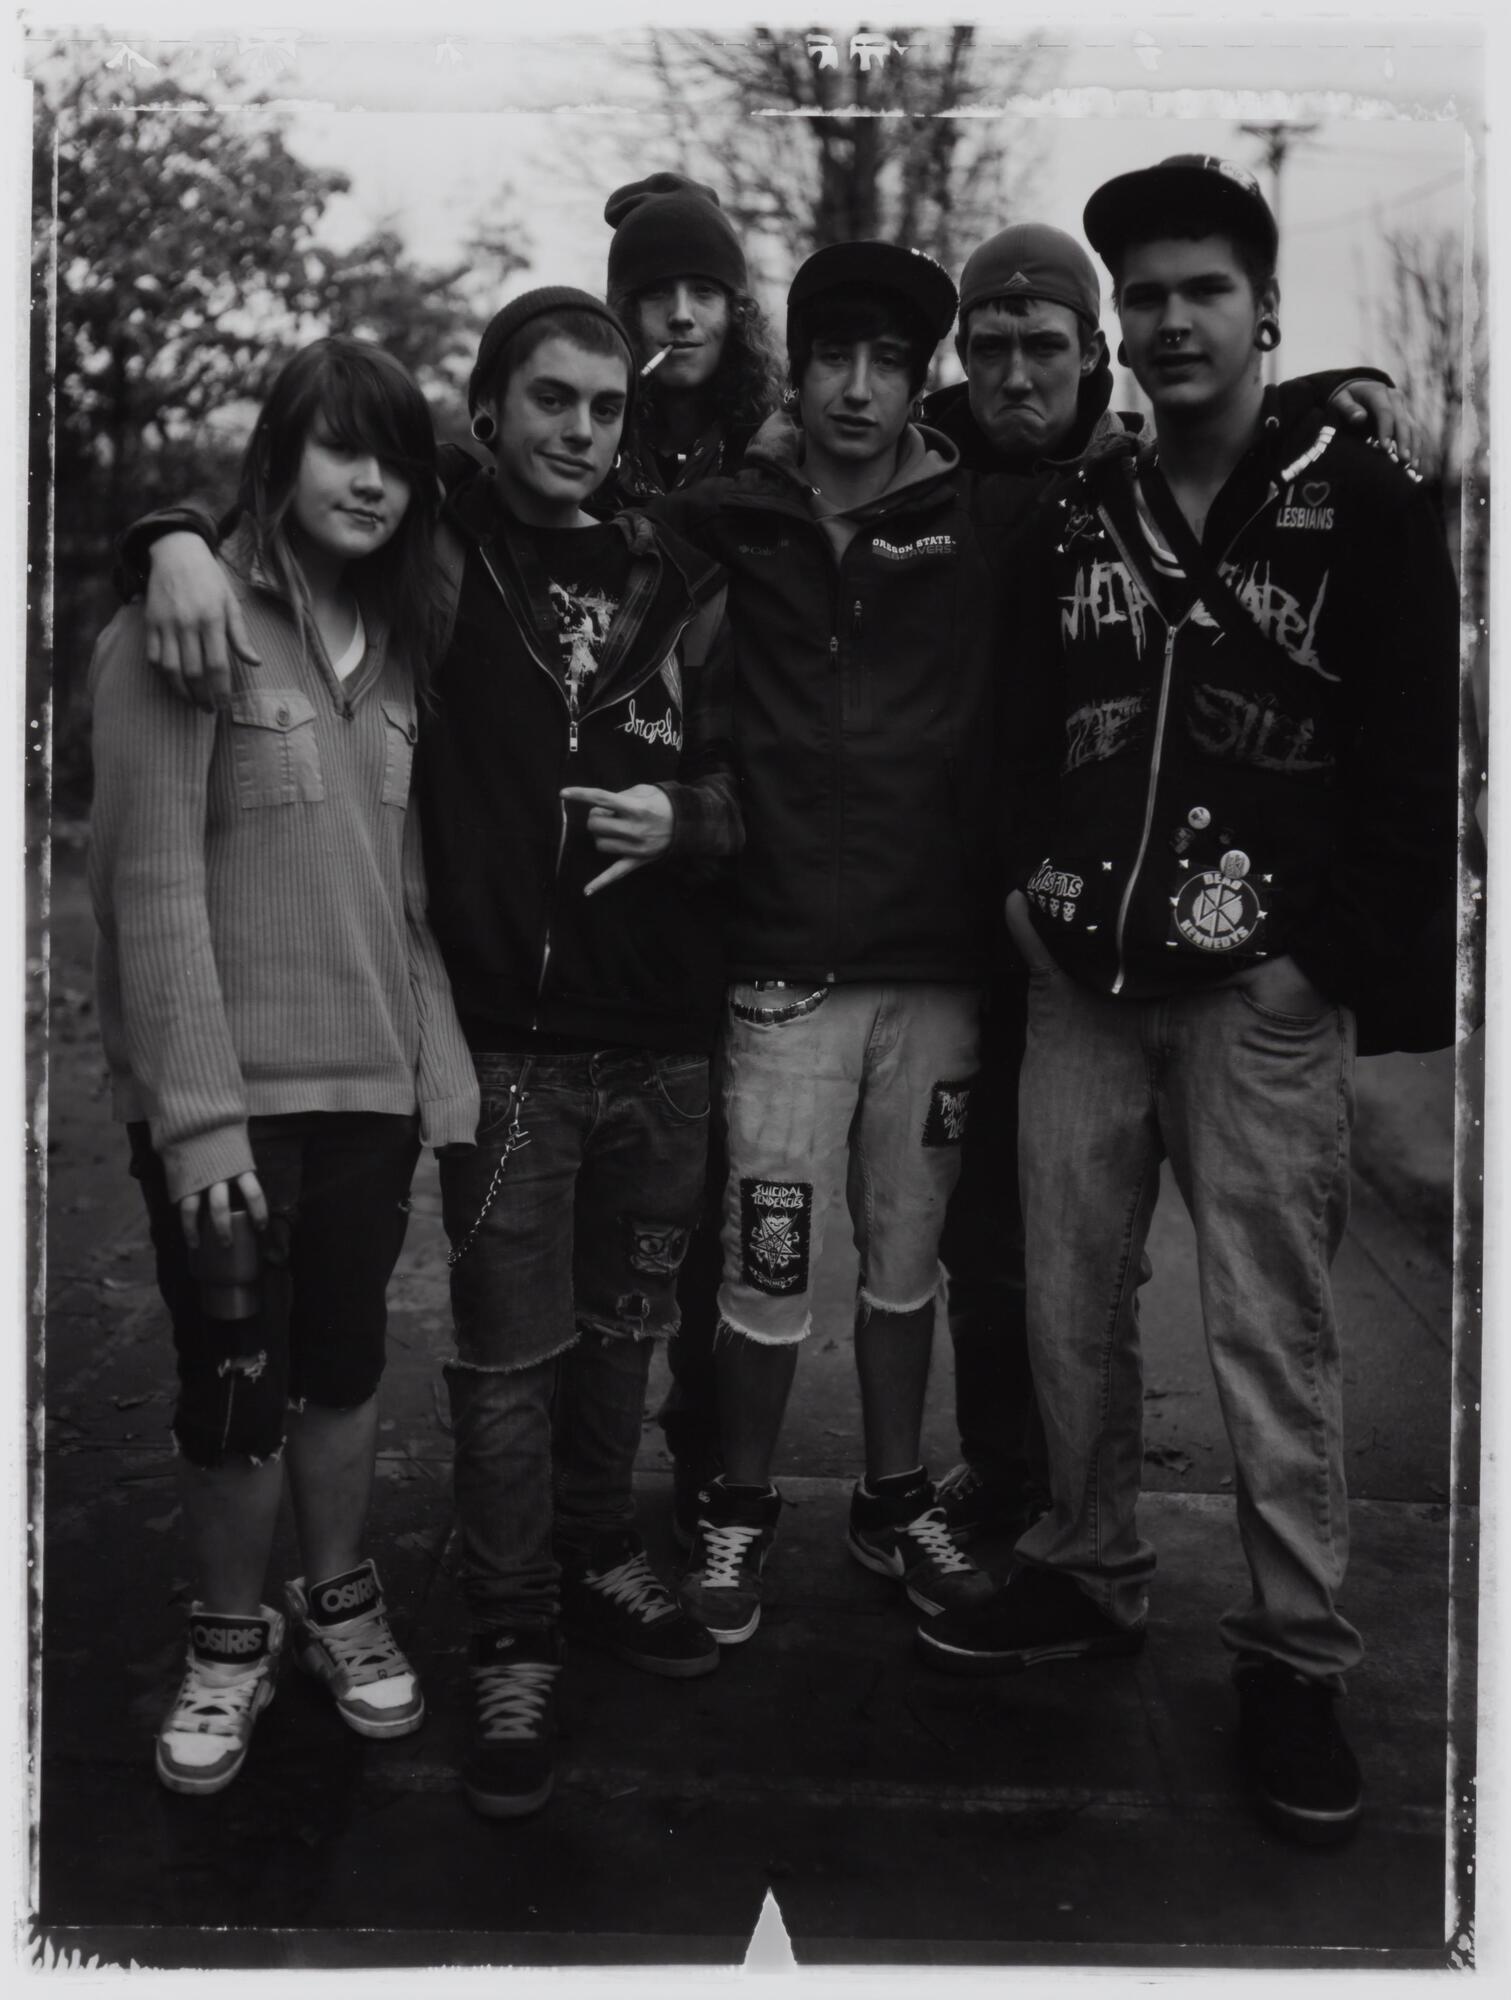 This photograph depicts a group of teenagers wearing punk rock-style clothing with their arms around one another and posing for the camera. 